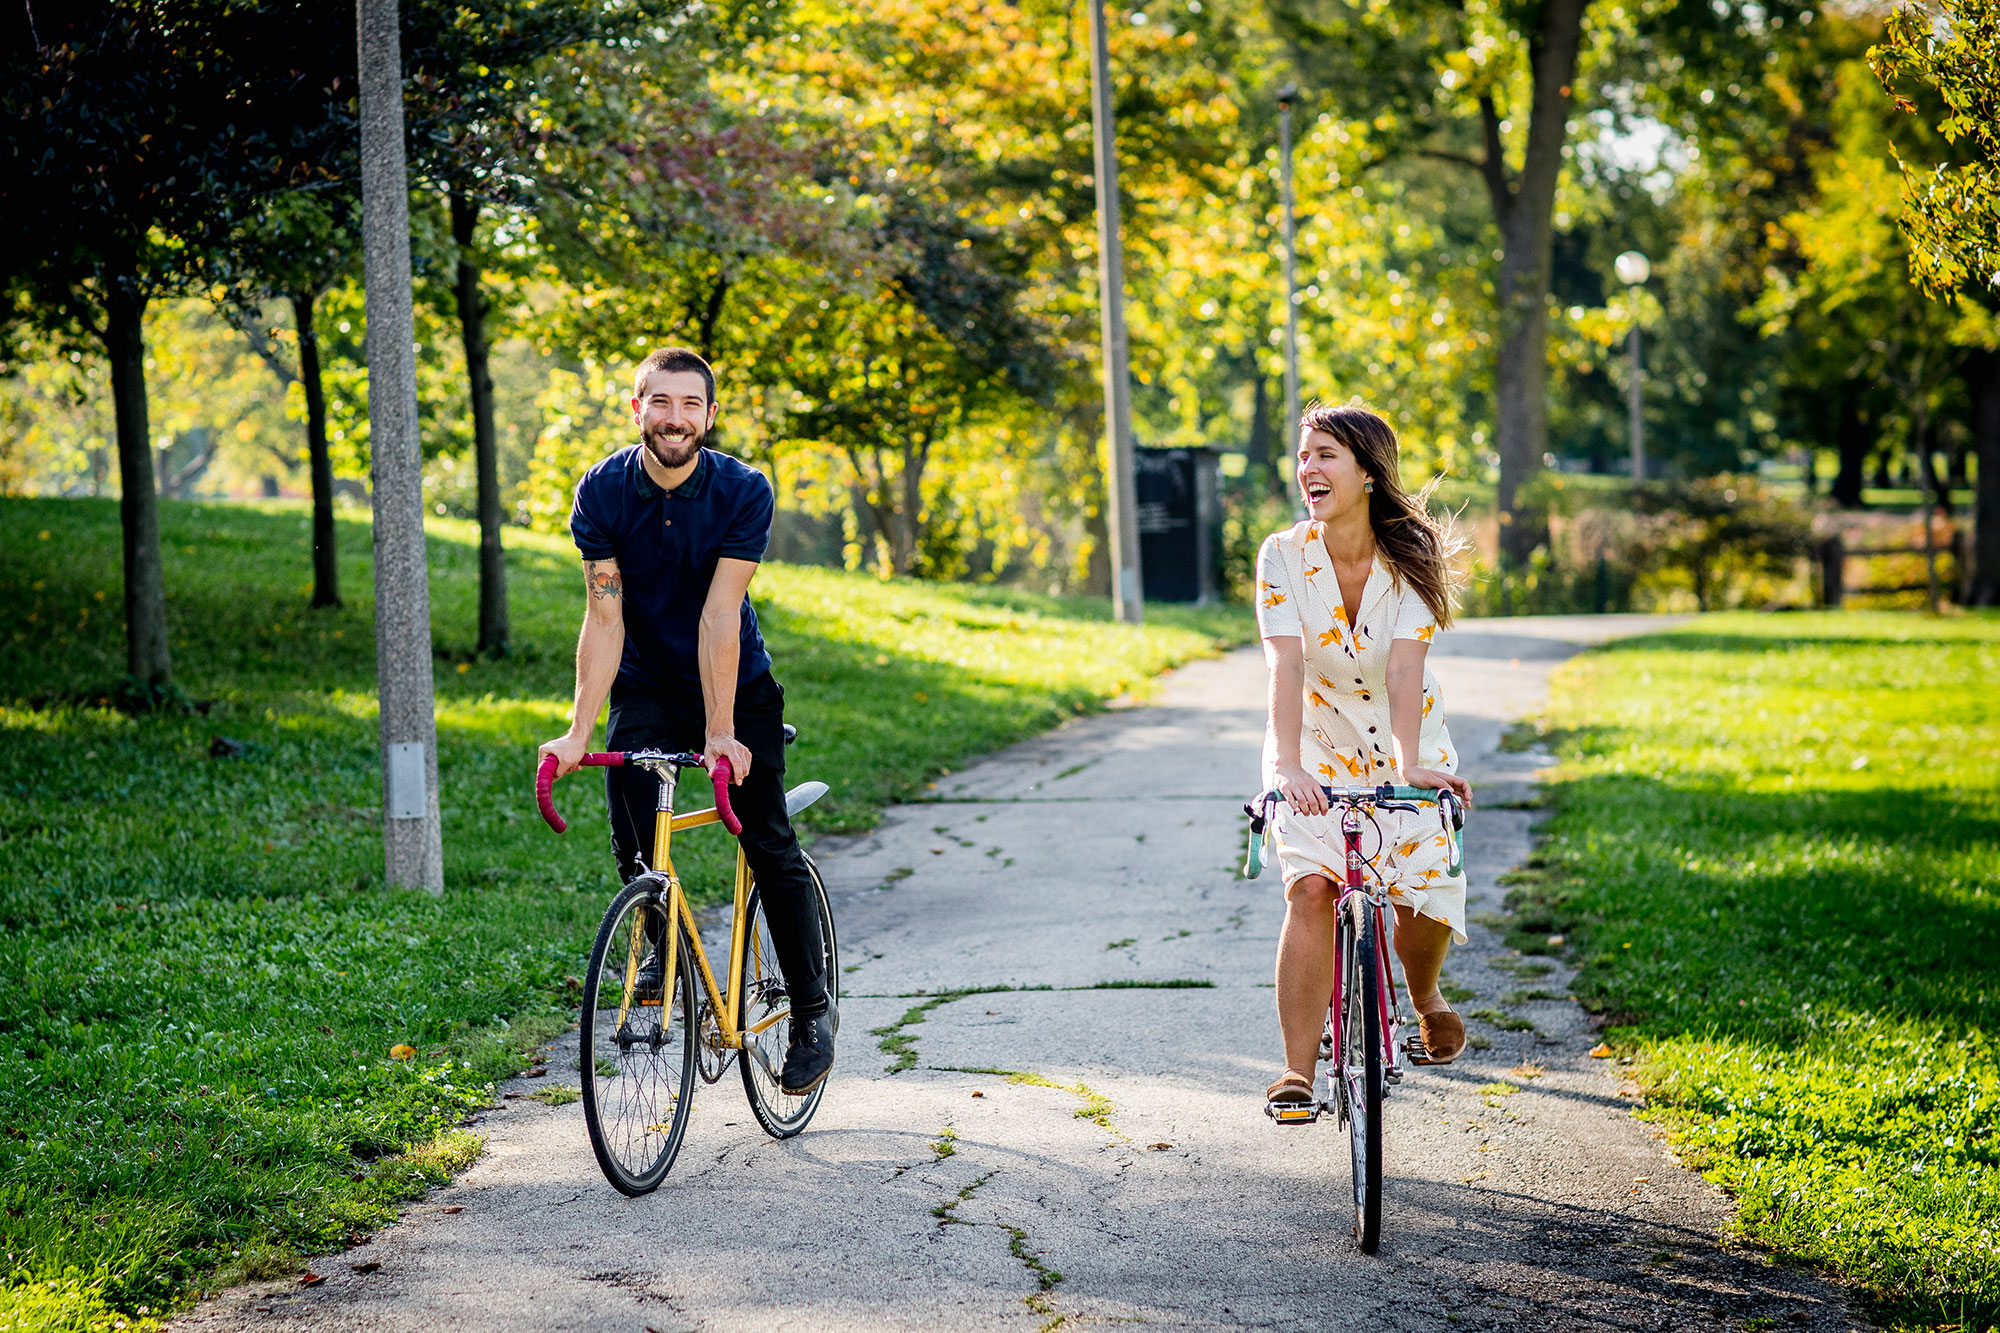 A couple laughs together while riding bikes during their Humboldt Park engagement session in Chicago.